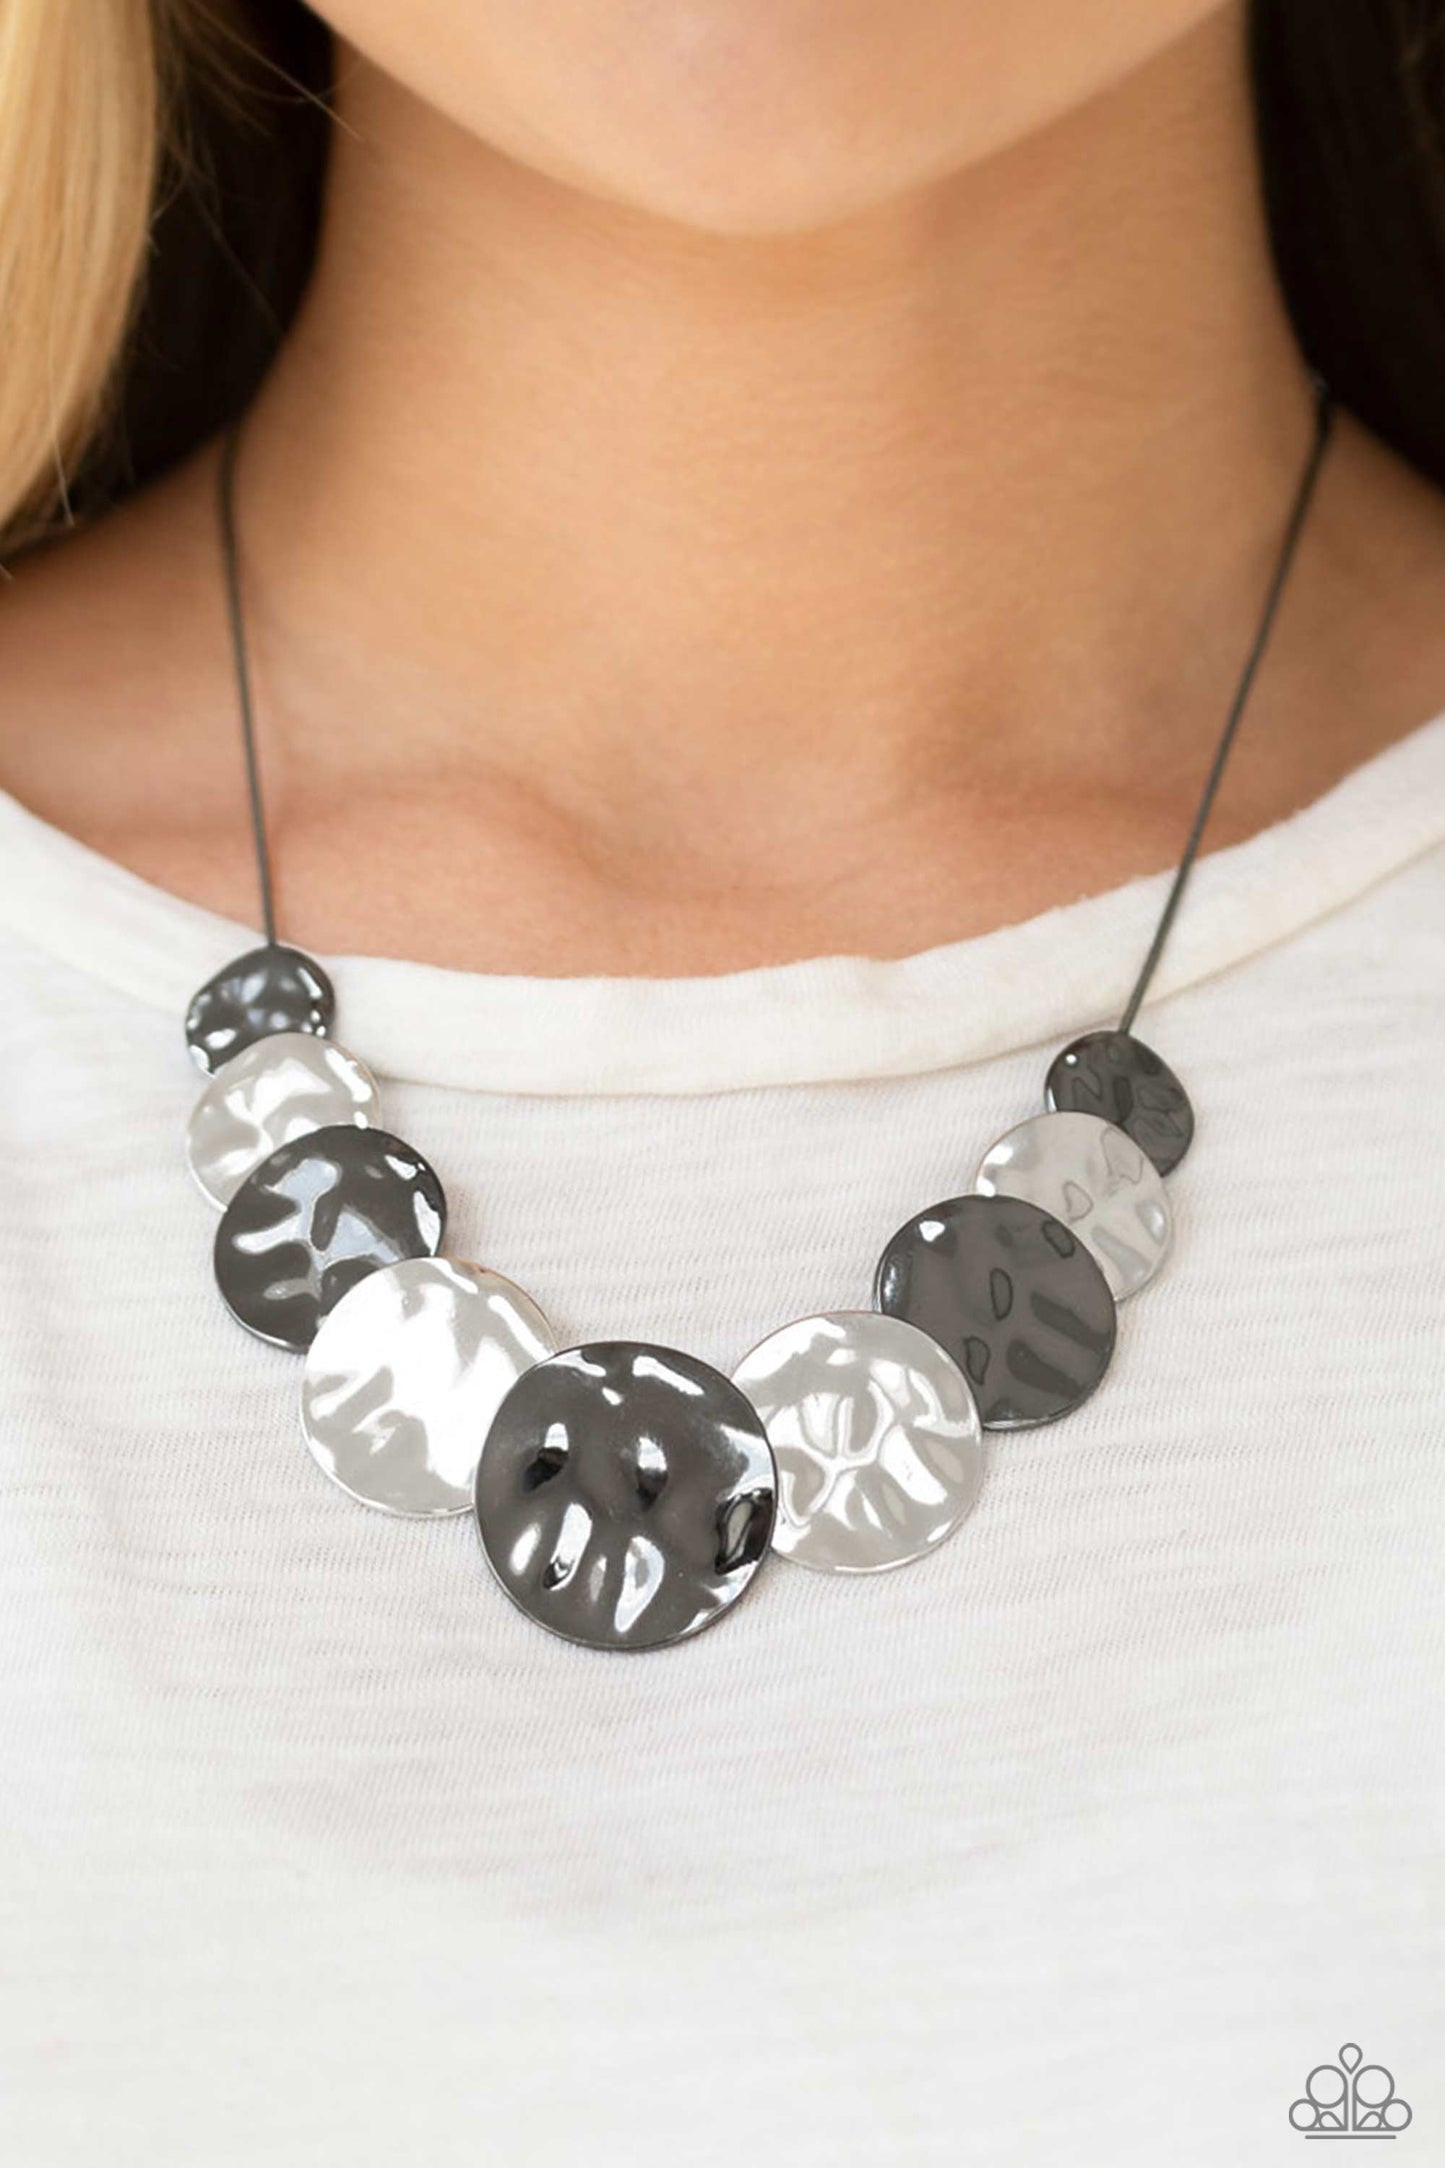 Paparazzi Necklaces - A Daring DISCovery - Black